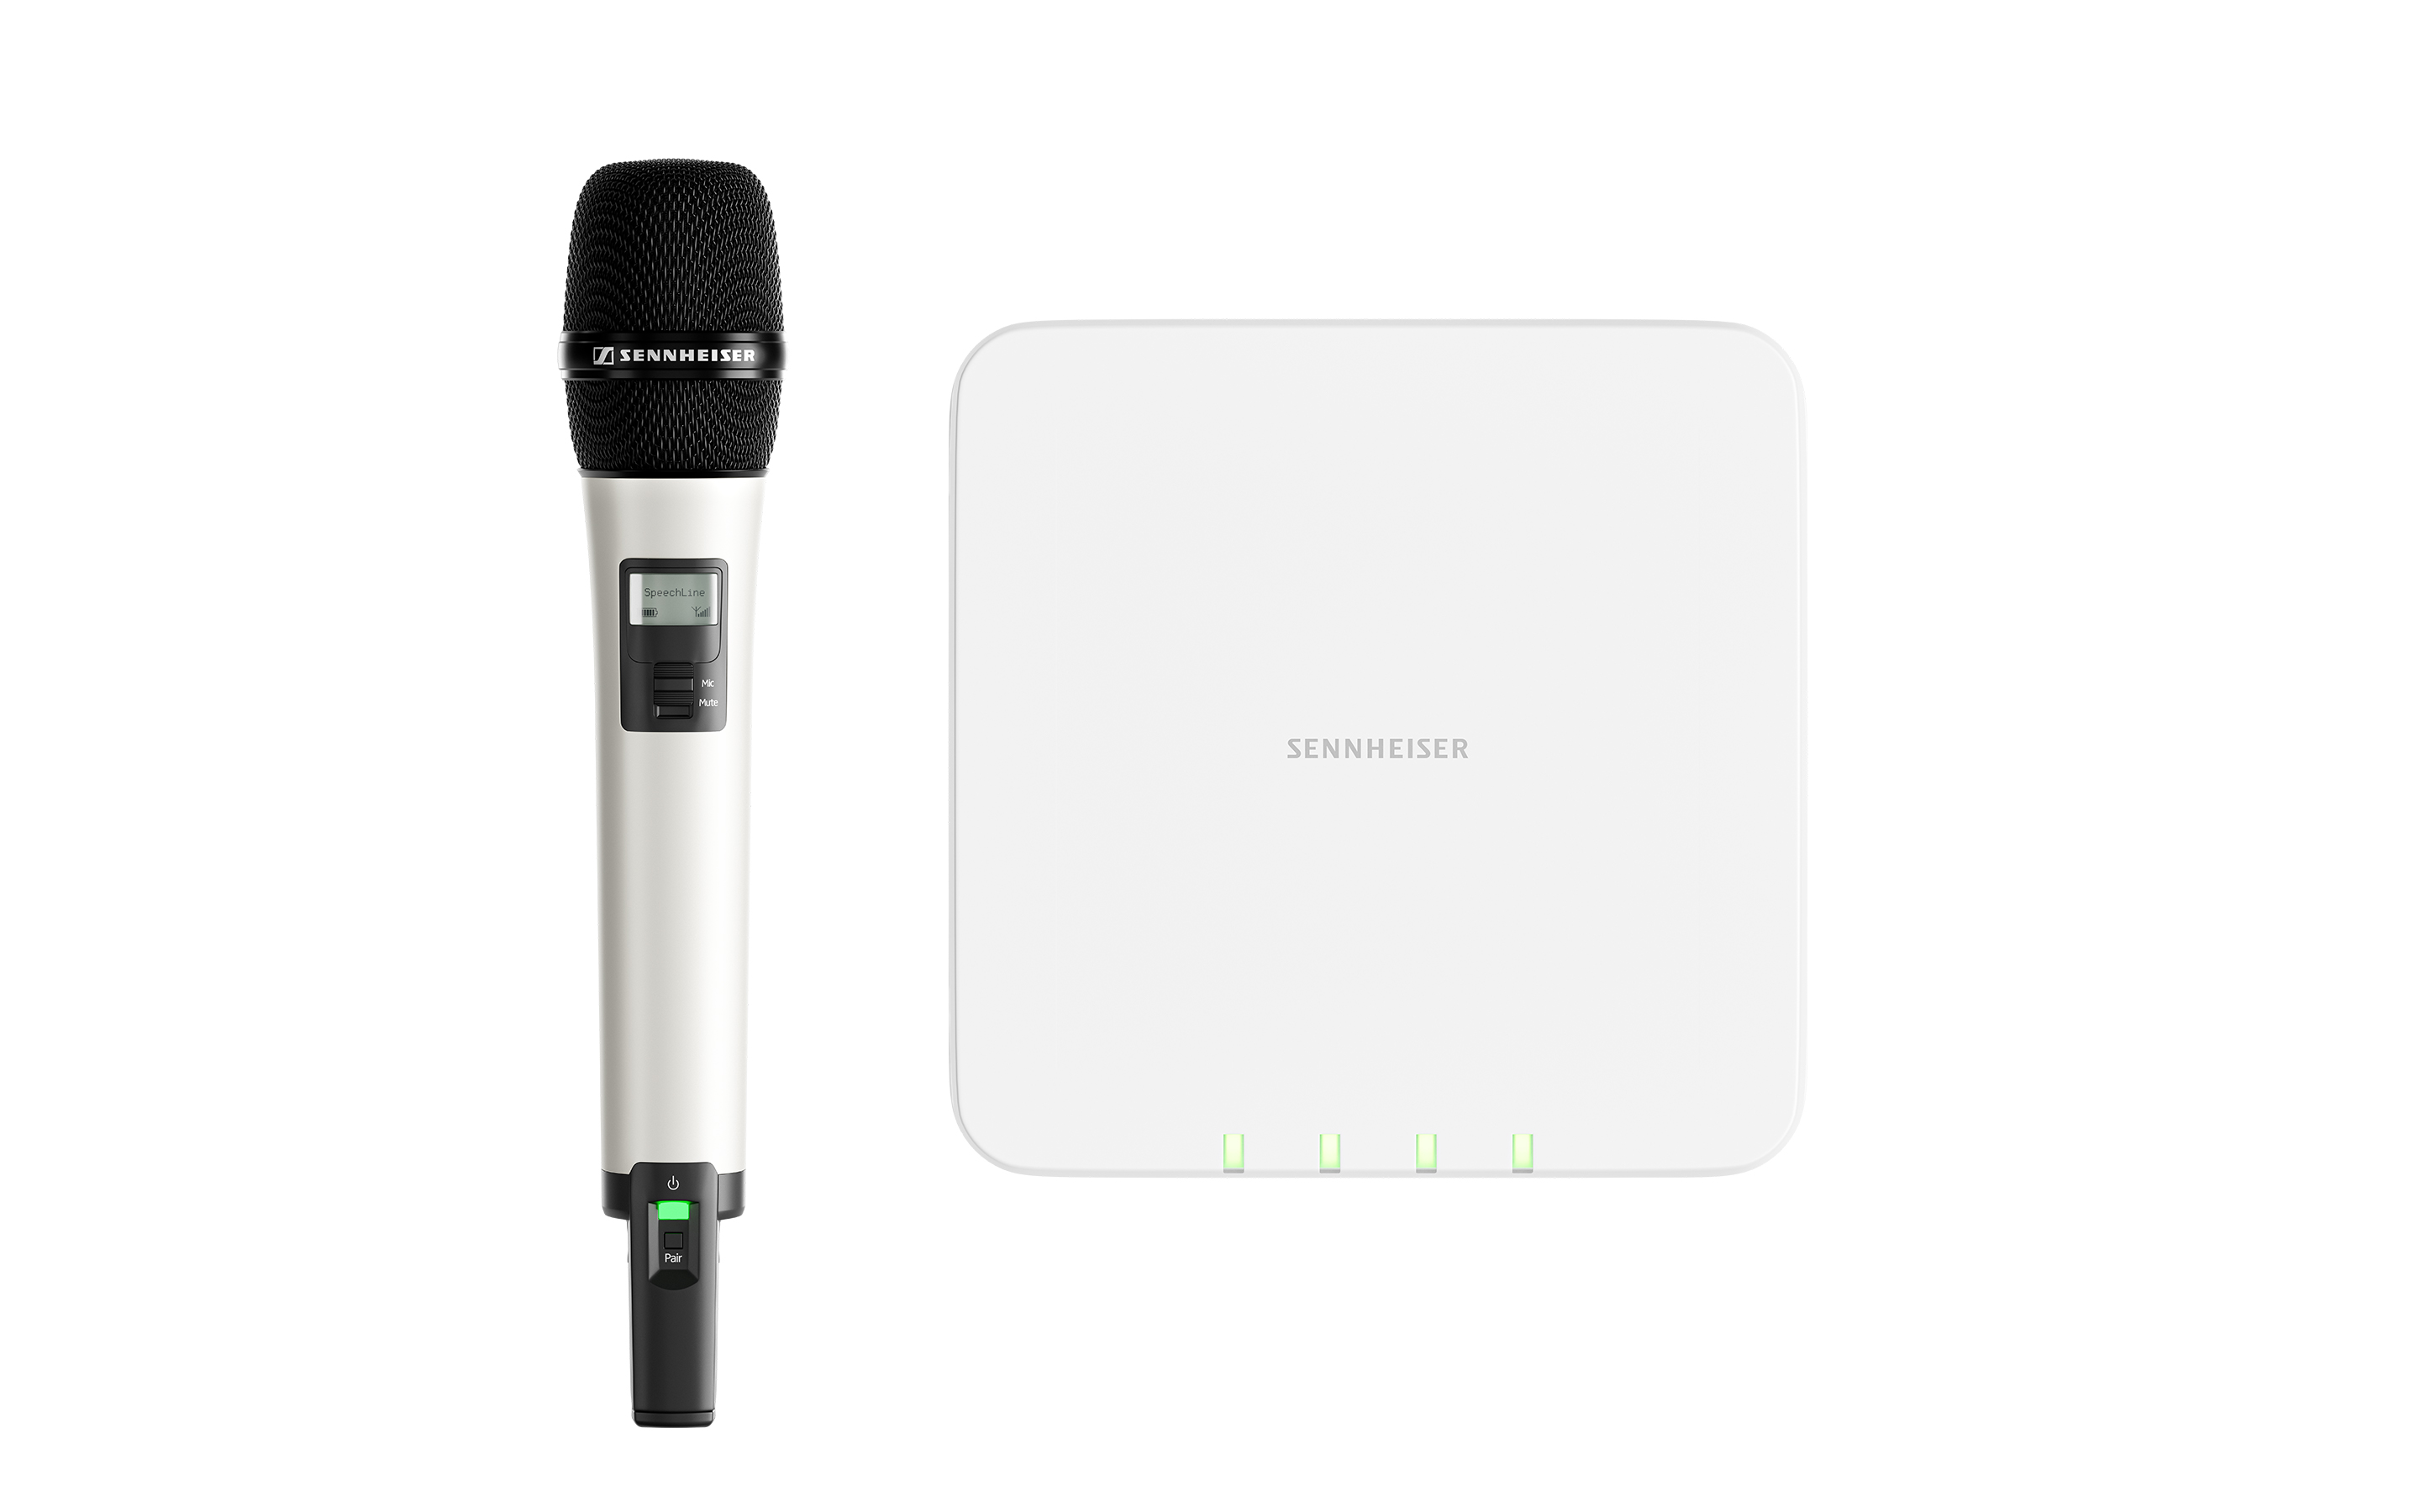 SpeechLine Digital Wireless – This microphone system has been designed specifically for speech and lecture applications for higher education and corporate use
​ ​
On BIMobject: ​
SL Rack-Receiver DW
SL Multi-Channel Receiver DW
CHG 4N Charger
CHG 2W Charger
CHG 2 Charger
AWM 2 Antenna
AWM 4 Antenna